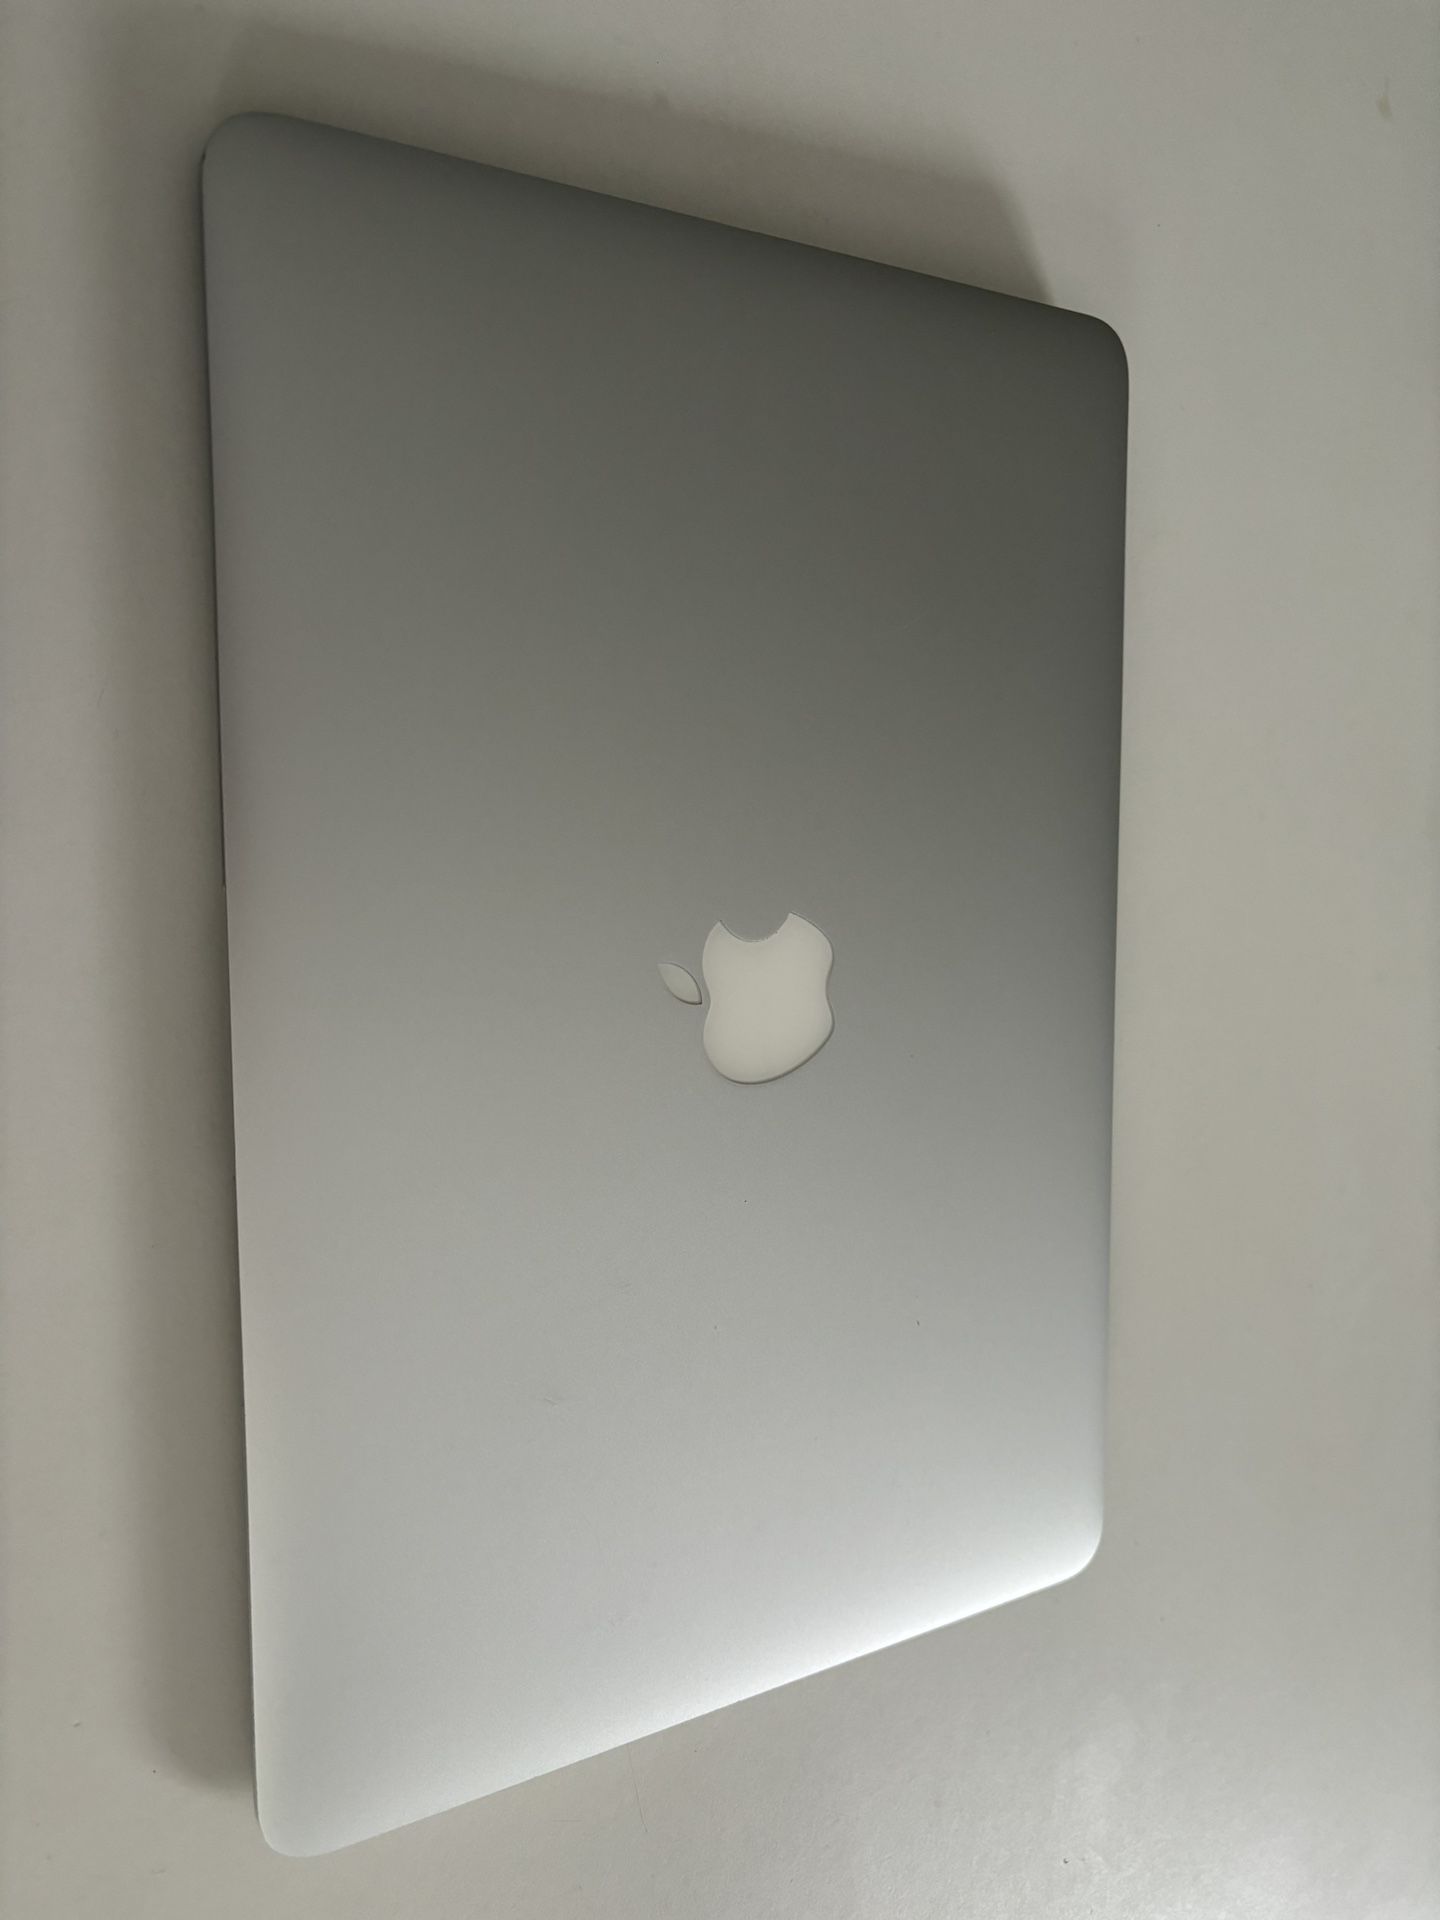 2015 MacBook Air 13.3” with charger 